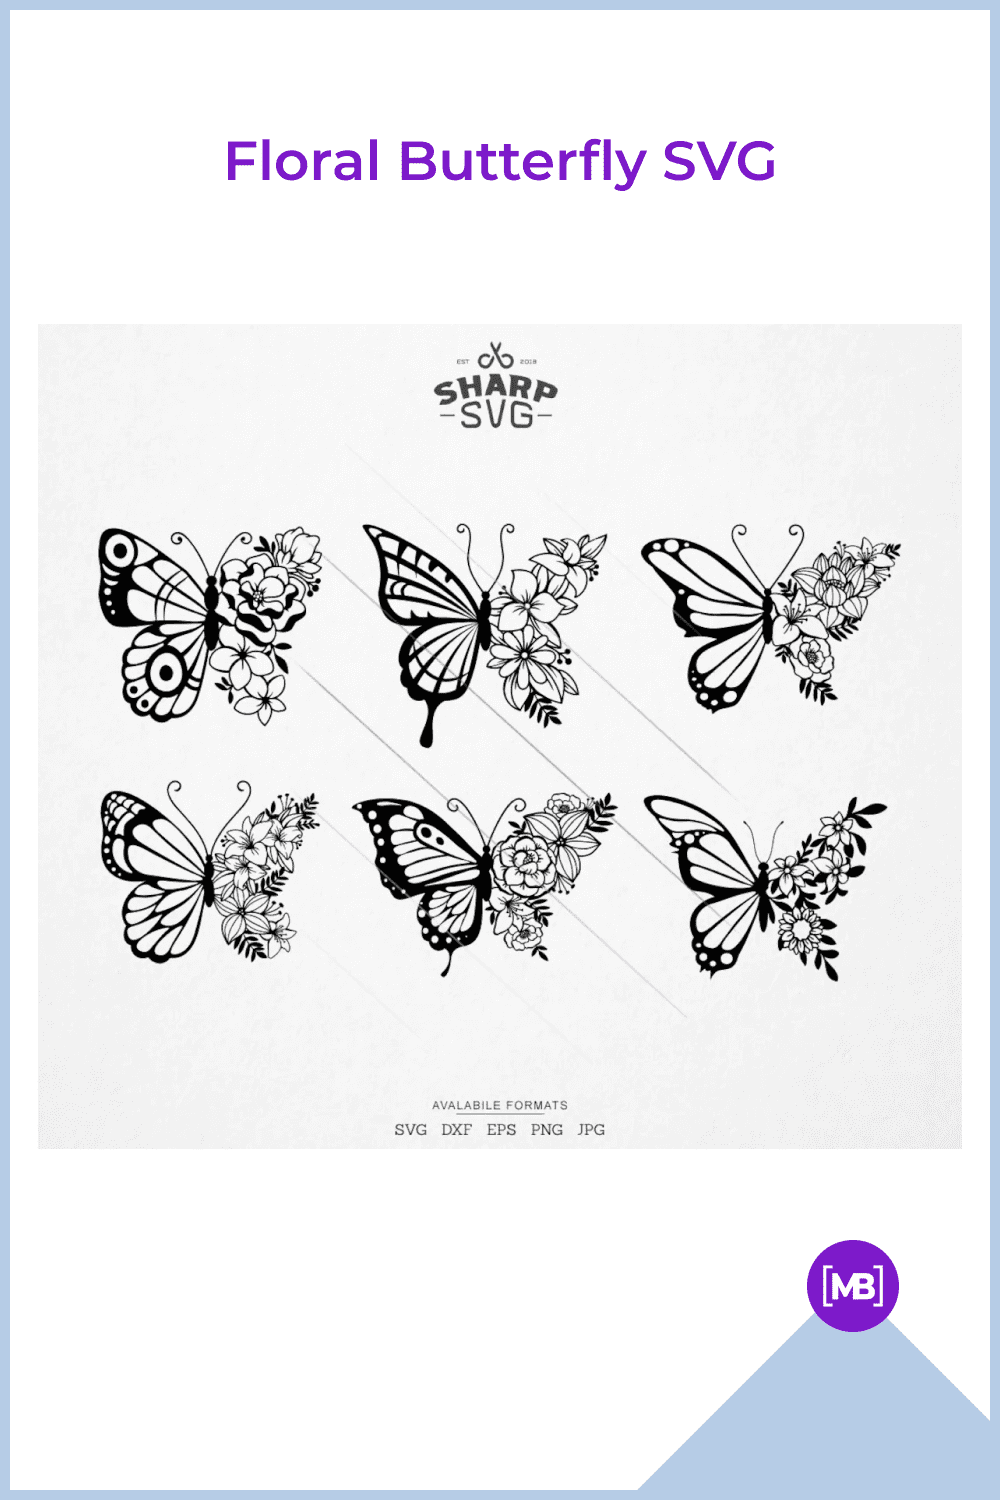 Floral Butterfly SVG.